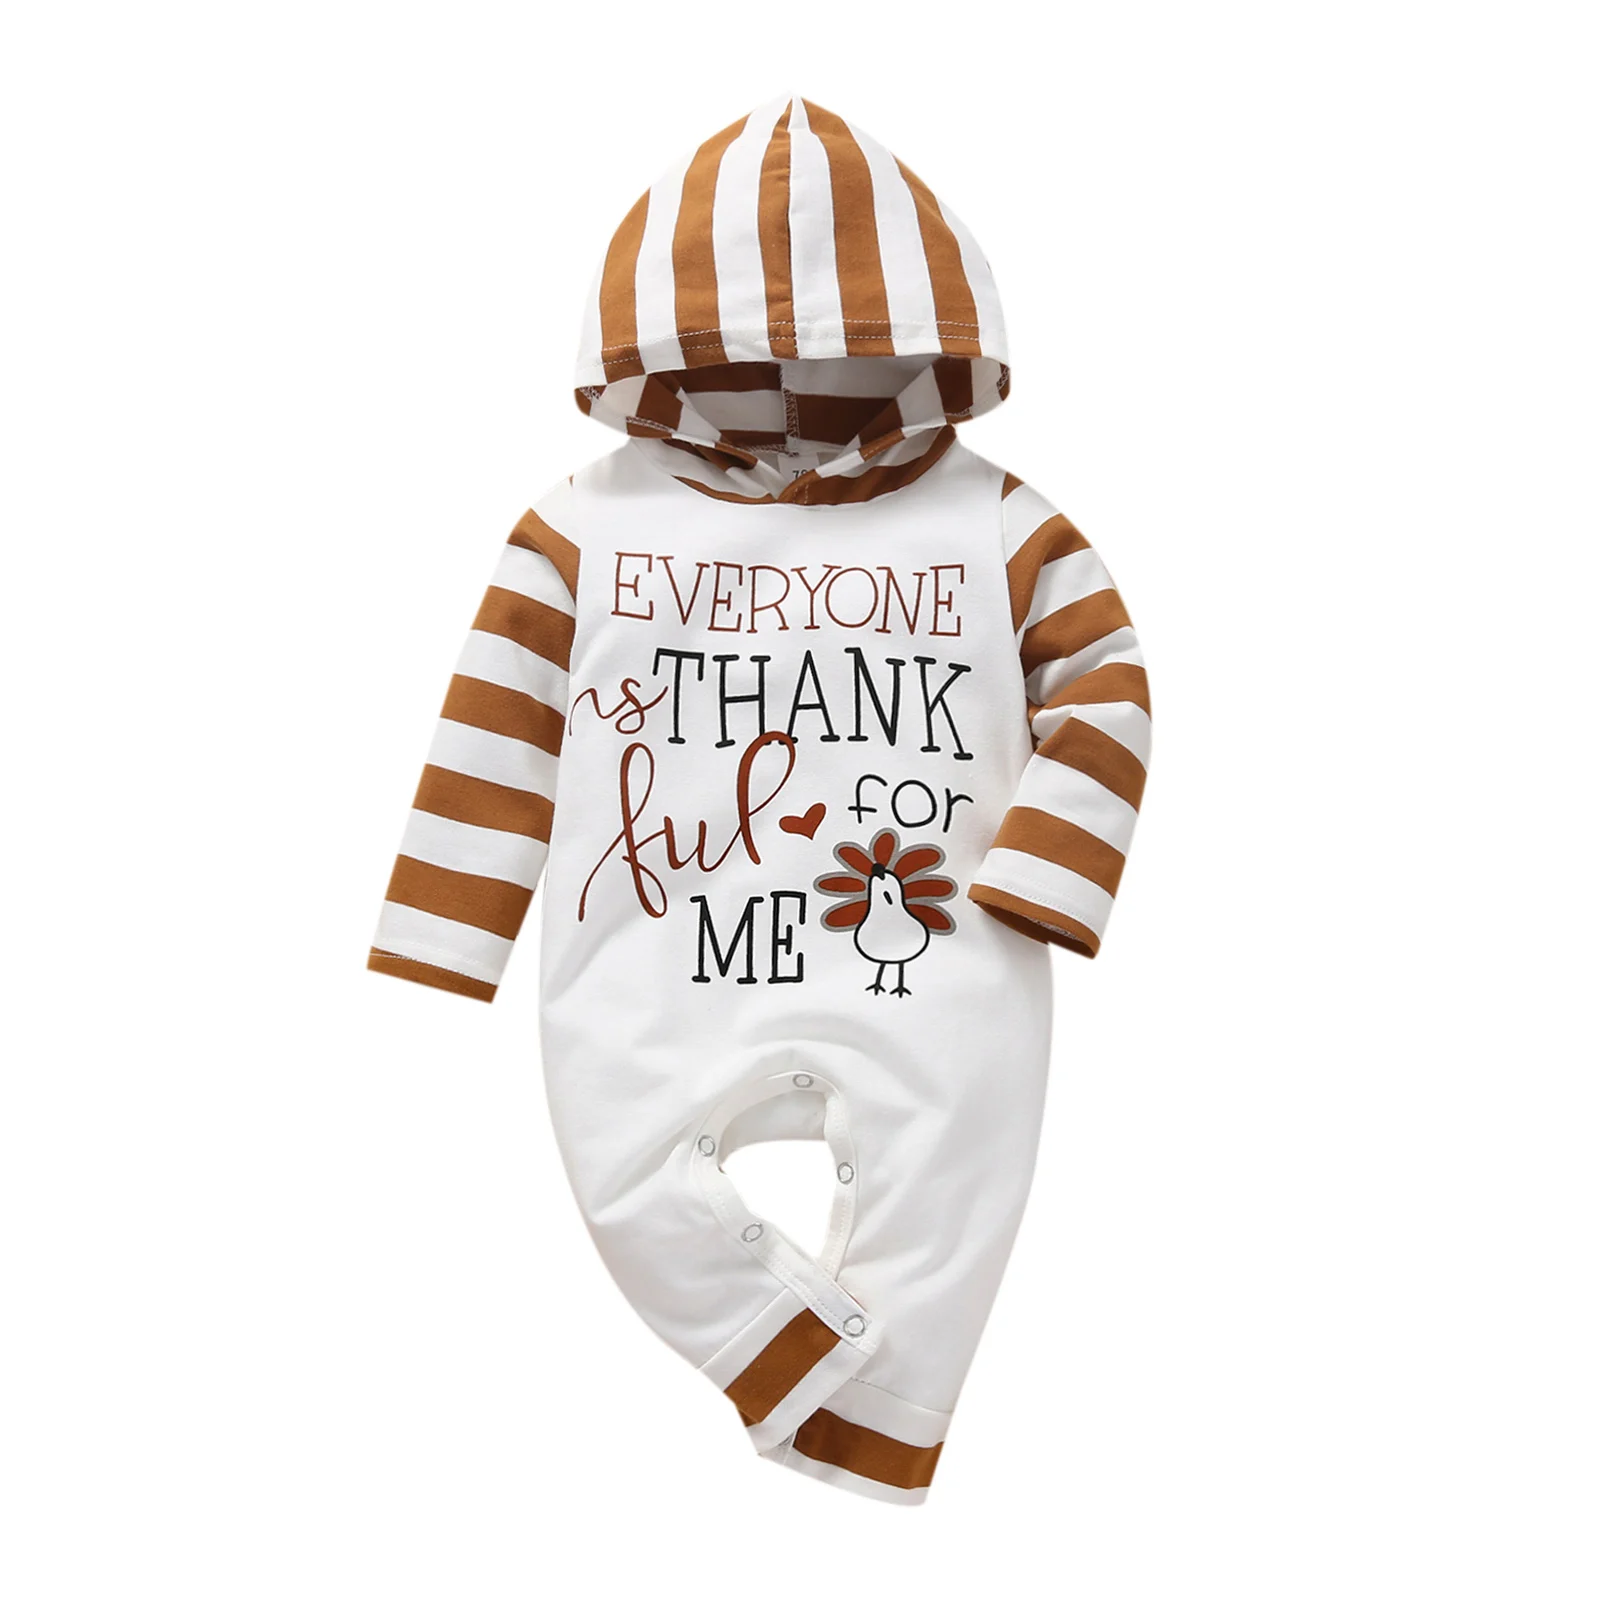 2021-06-22 Lioraitiin 0-18M Infant Baby Girl Autumn Romper Long Sleeve Letter Turkey Printed Hooded Jumpsuit Clothing